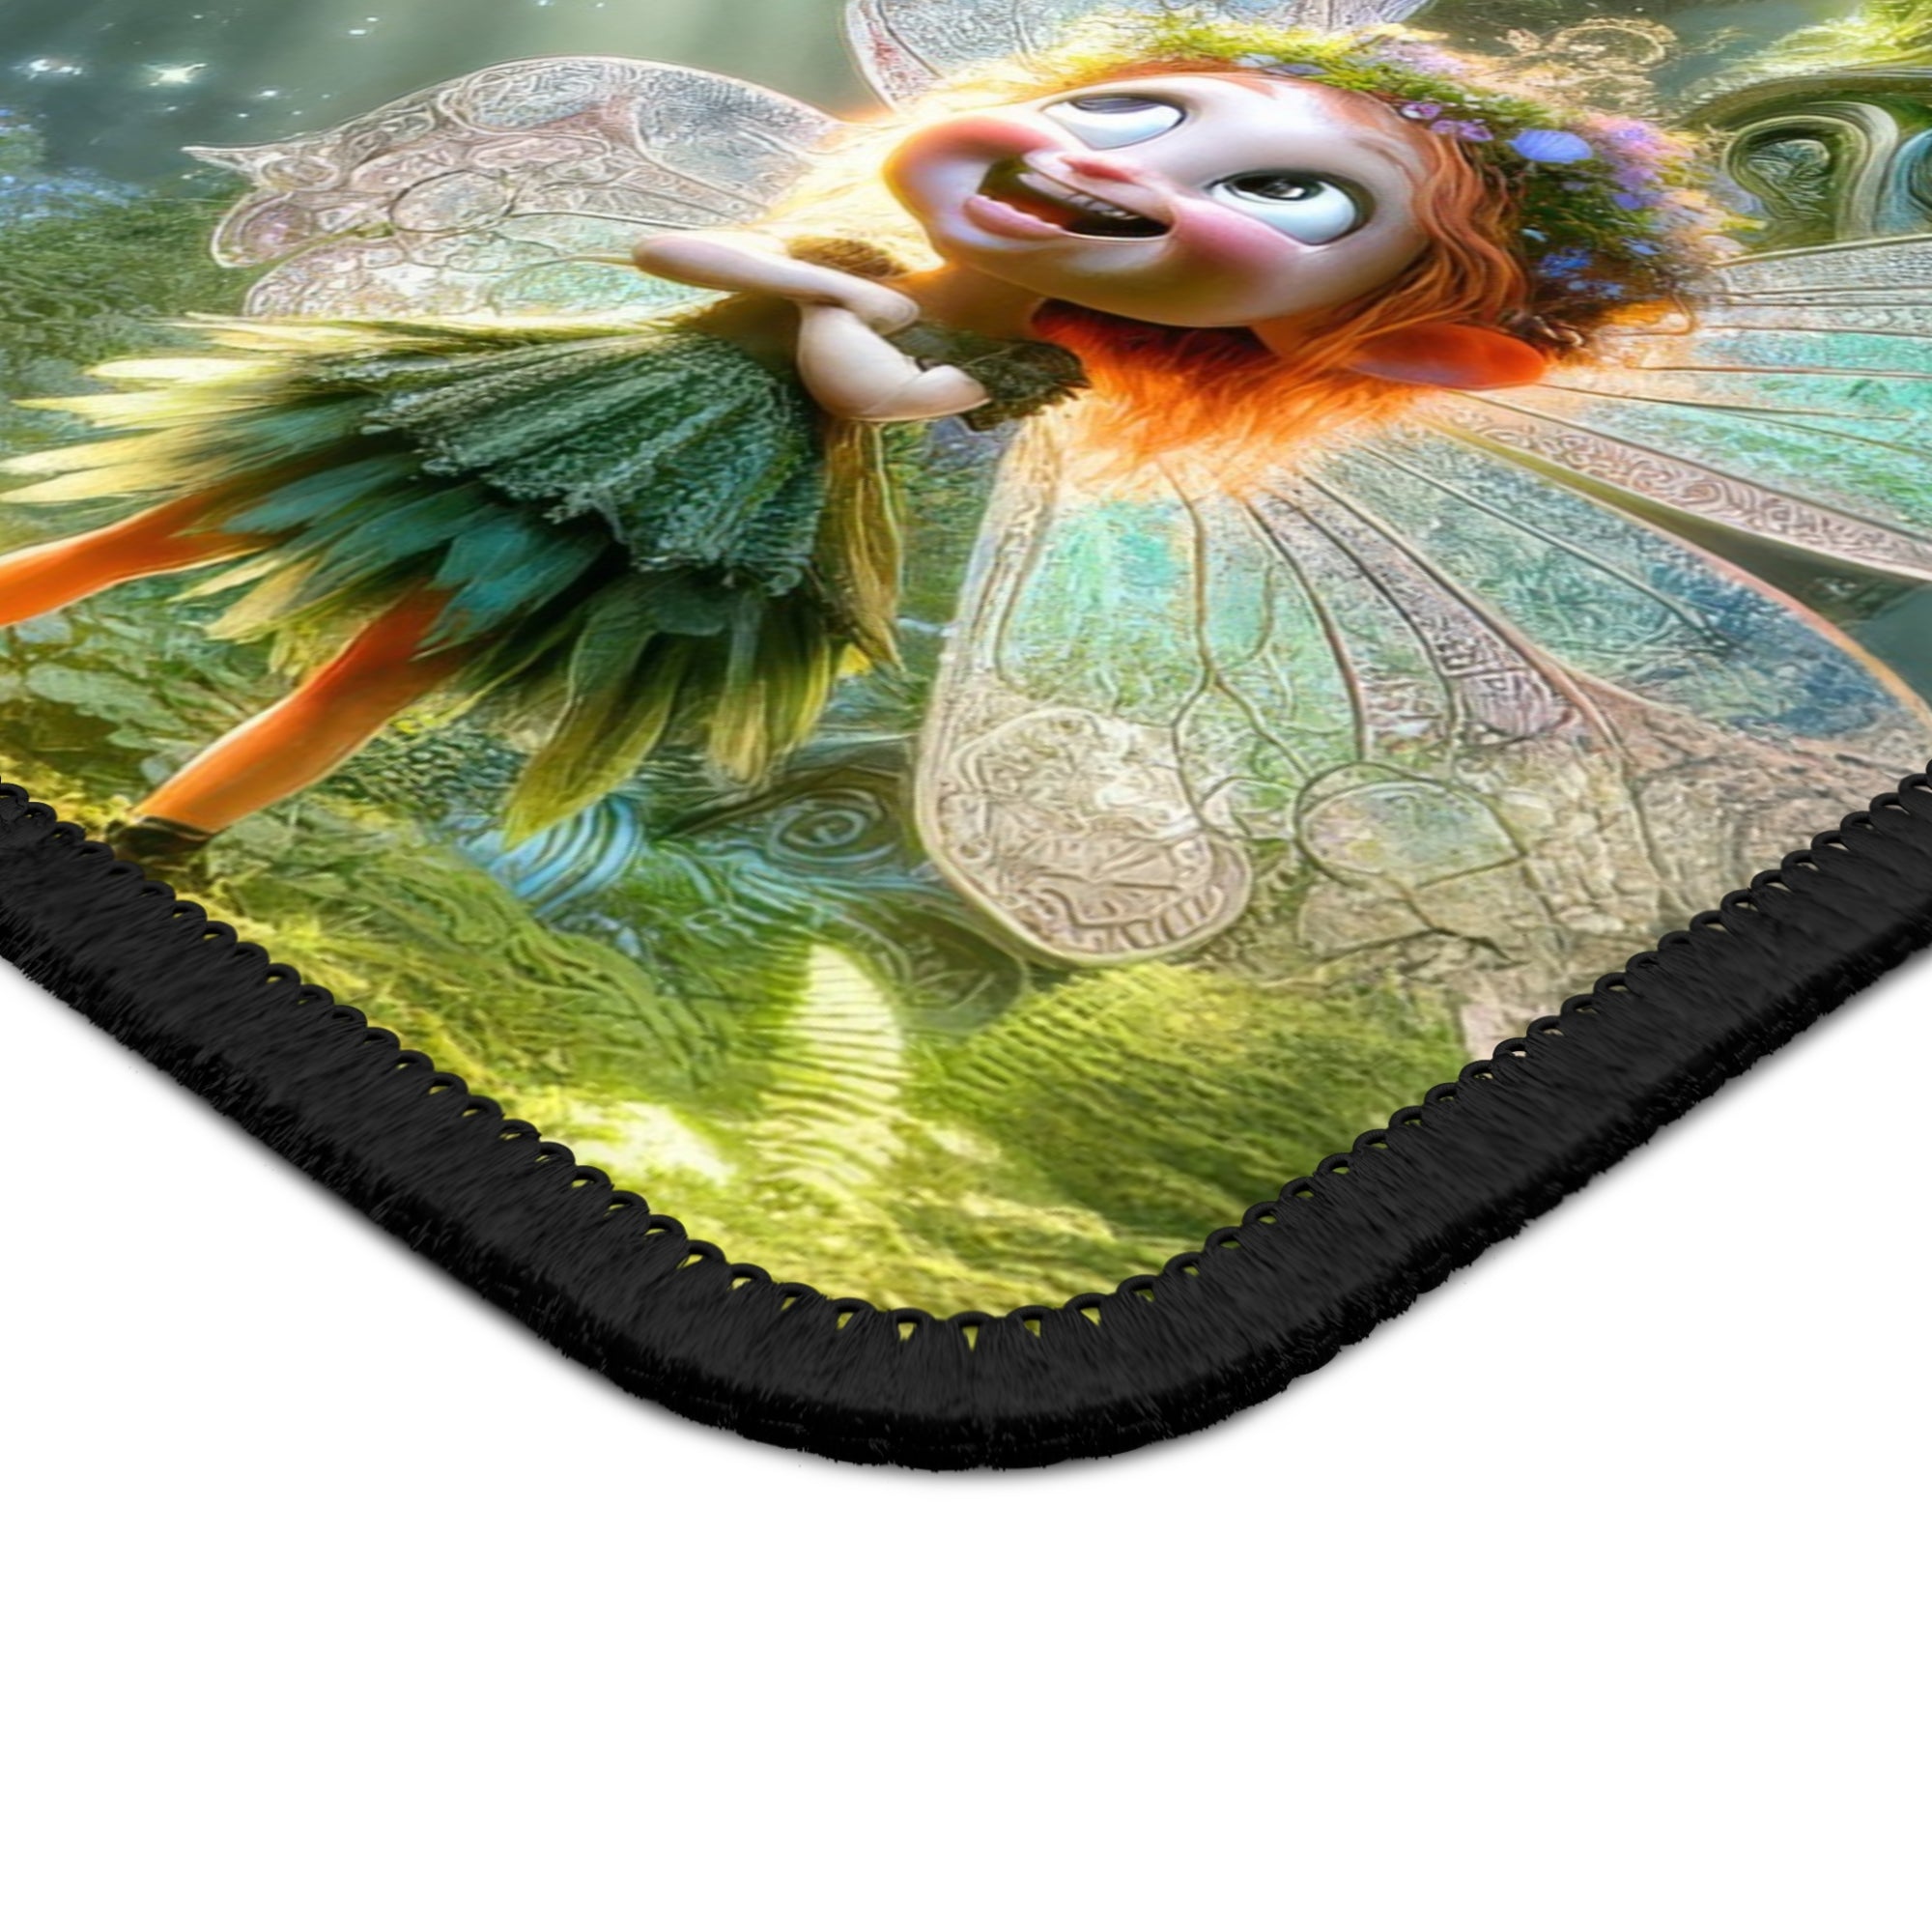 Gleaming Giggles in the Grove Mouse Pad